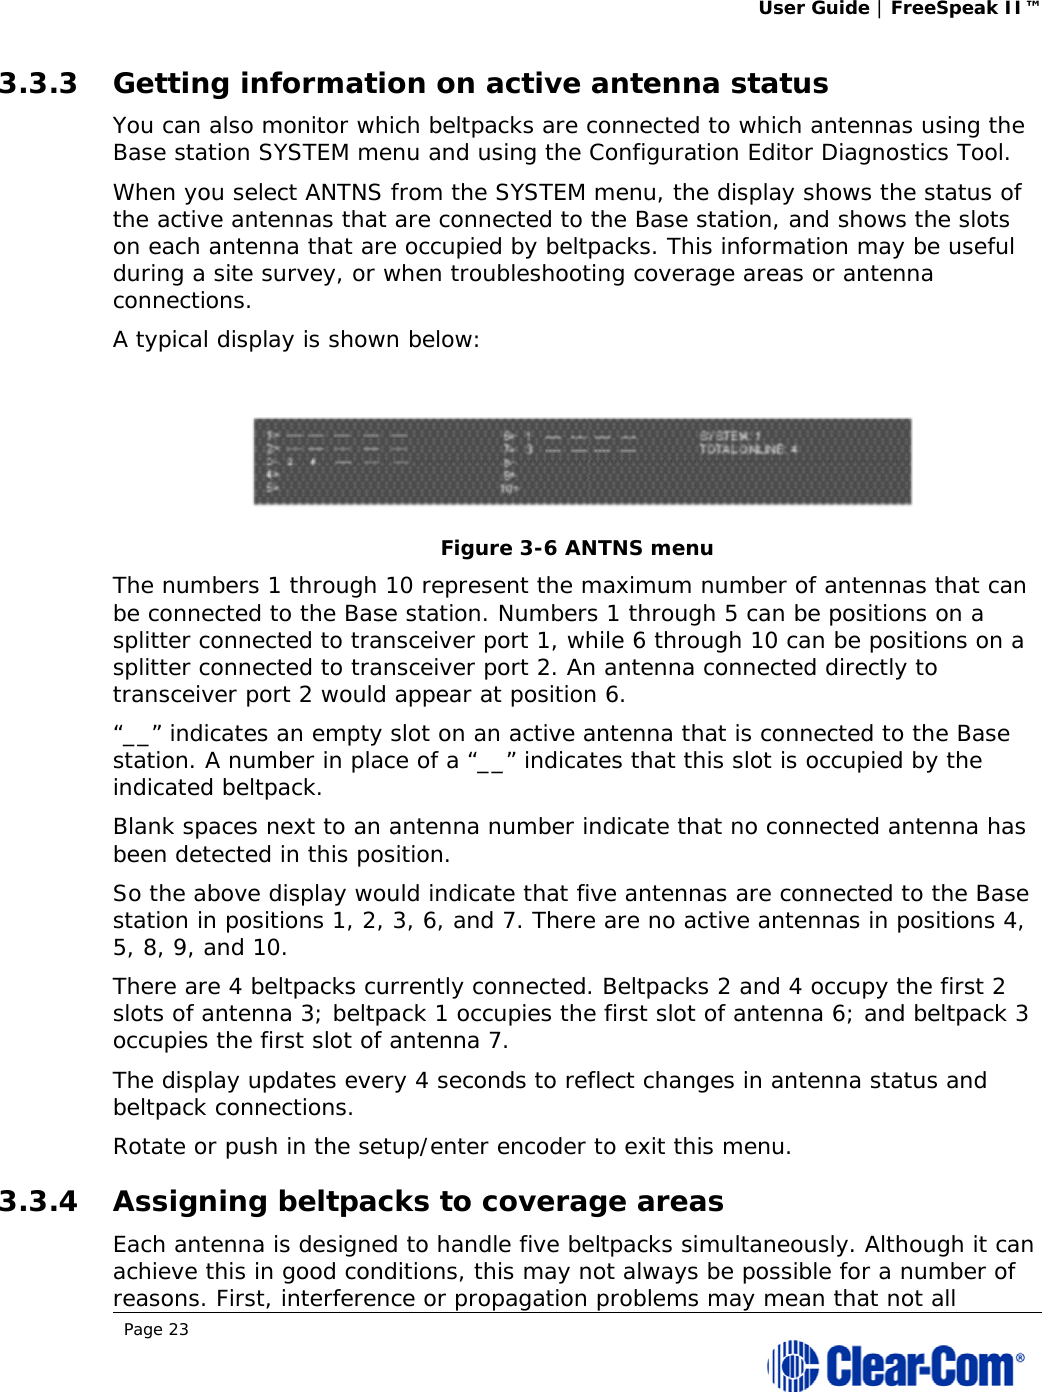 User Guide | FreeSpeak II™  Page 23  3.3.3 Getting information on active antenna status  You can also monitor which beltpacks are connected to which antennas using the Base station SYSTEM menu and using the Configuration Editor Diagnostics Tool. When you select ANTNS from the SYSTEM menu, the display shows the status of the active antennas that are connected to the Base station, and shows the slots on each antenna that are occupied by beltpacks. This information may be useful during a site survey, or when troubleshooting coverage areas or antenna connections.  A typical display is shown below:  Figure 3-6 ANTNS menu  The numbers 1 through 10 represent the maximum number of antennas that can be connected to the Base station. Numbers 1 through 5 can be positions on a splitter connected to transceiver port 1, while 6 through 10 can be positions on a splitter connected to transceiver port 2. An antenna connected directly to transceiver port 2 would appear at position 6.  “__” indicates an empty slot on an active antenna that is connected to the Base station. A number in place of a “__” indicates that this slot is occupied by the indicated beltpack.  Blank spaces next to an antenna number indicate that no connected antenna has been detected in this position.  So the above display would indicate that five antennas are connected to the Base station in positions 1, 2, 3, 6, and 7. There are no active antennas in positions 4, 5, 8, 9, and 10.  There are 4 beltpacks currently connected. Beltpacks 2 and 4 occupy the first 2 slots of antenna 3; beltpack 1 occupies the first slot of antenna 6; and beltpack 3 occupies the first slot of antenna 7.  The display updates every 4 seconds to reflect changes in antenna status and beltpack connections.  Rotate or push in the setup/enter encoder to exit this menu. 3.3.4 Assigning beltpacks to coverage areas Each antenna is designed to handle five beltpacks simultaneously. Although it can achieve this in good conditions, this may not always be possible for a number of reasons. First, interference or propagation problems may mean that not all 